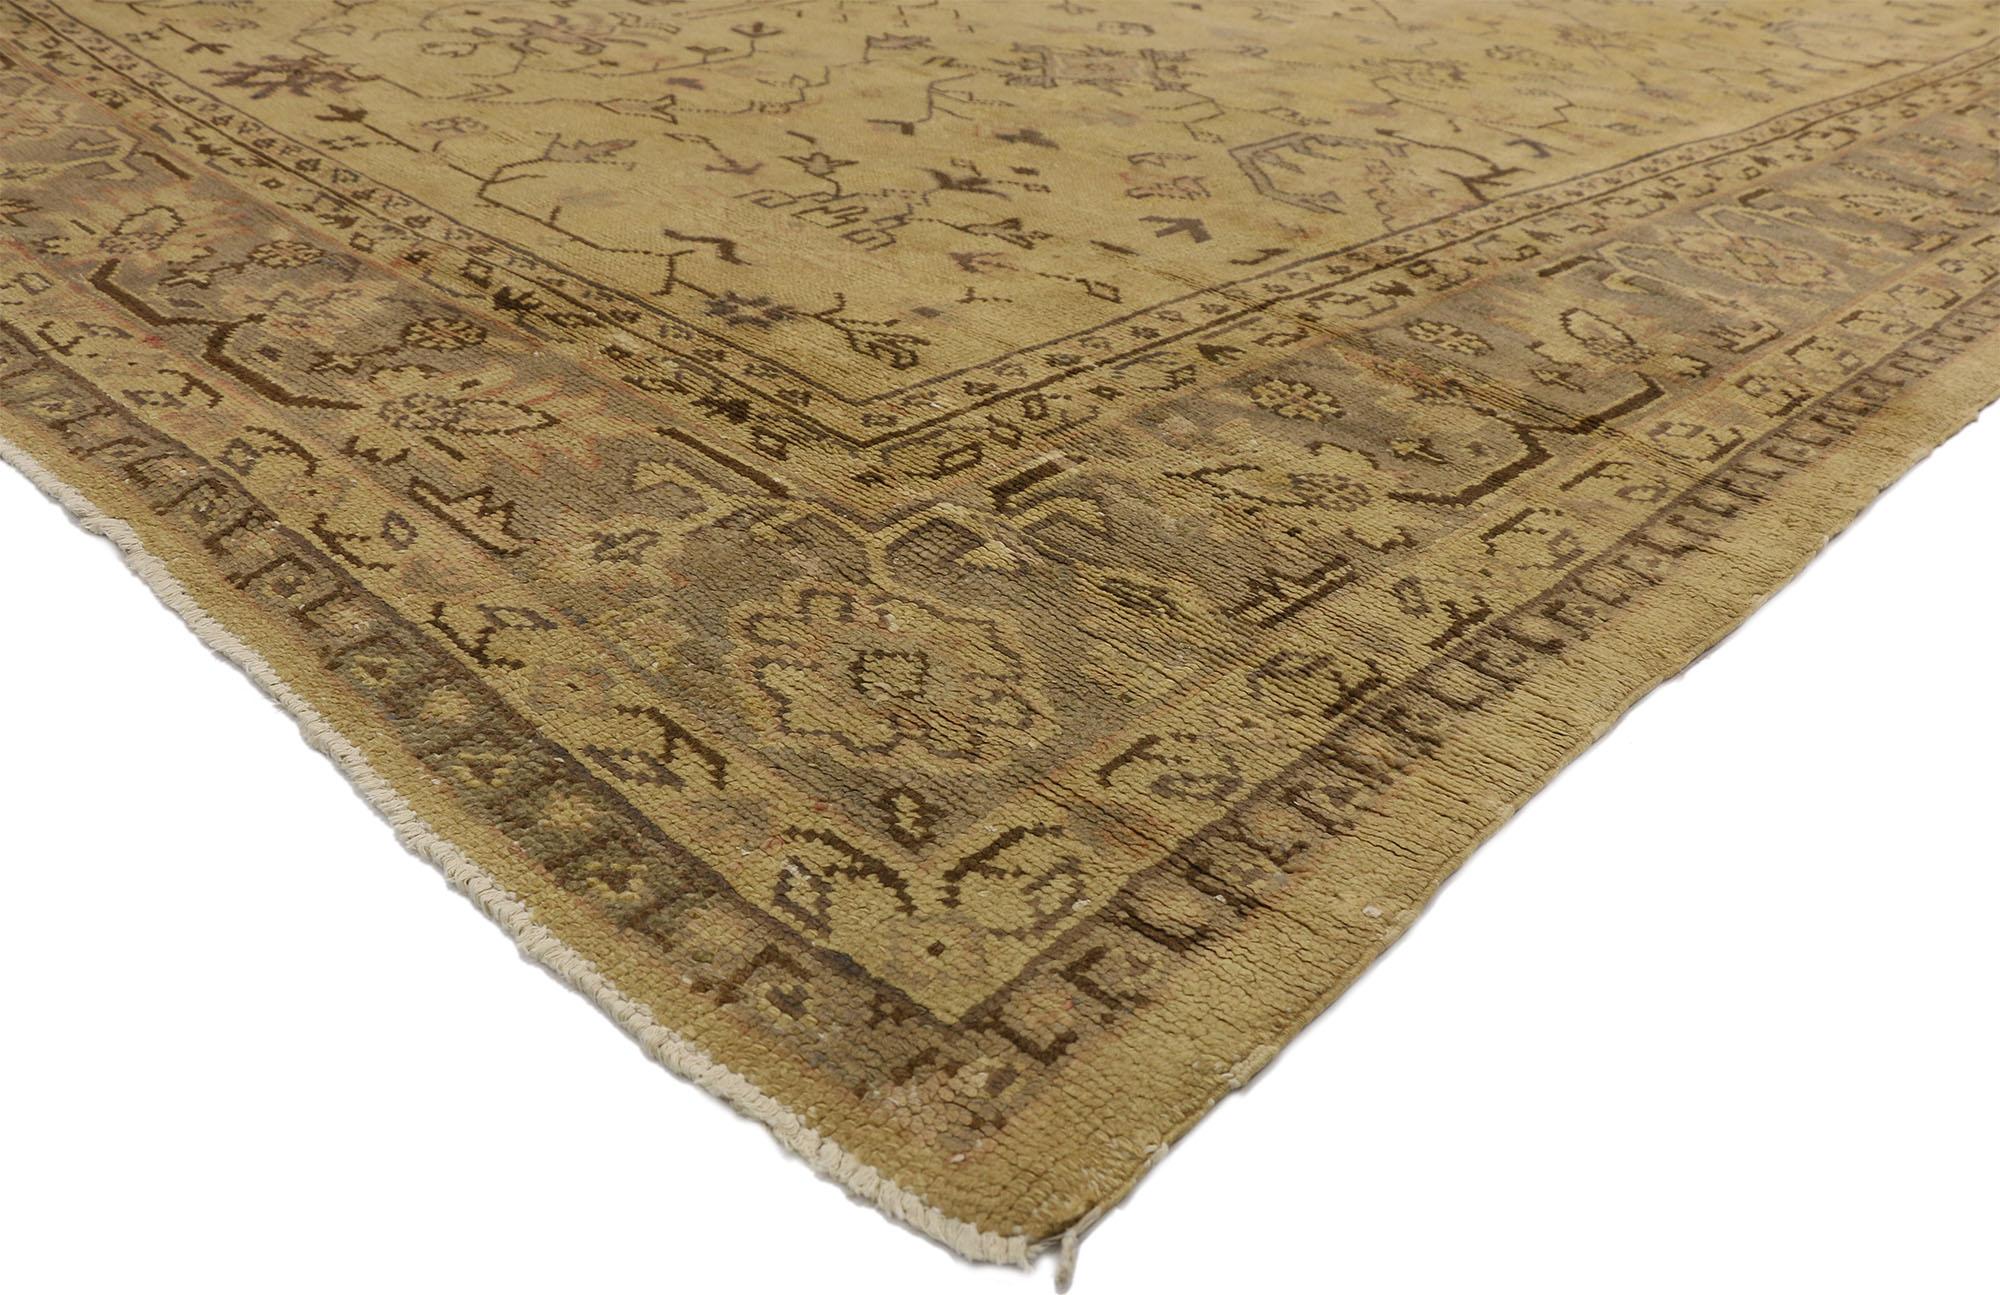 71497, antique Turkish Oushak rug with warm rustic Tuscan style 11'04 x 14'07. Warm and inviting combined with a timeless design, this hand knotted wool antique Turkish Oushak rug beautifully embodies rustic Tuscan style. The abrashed tan field is